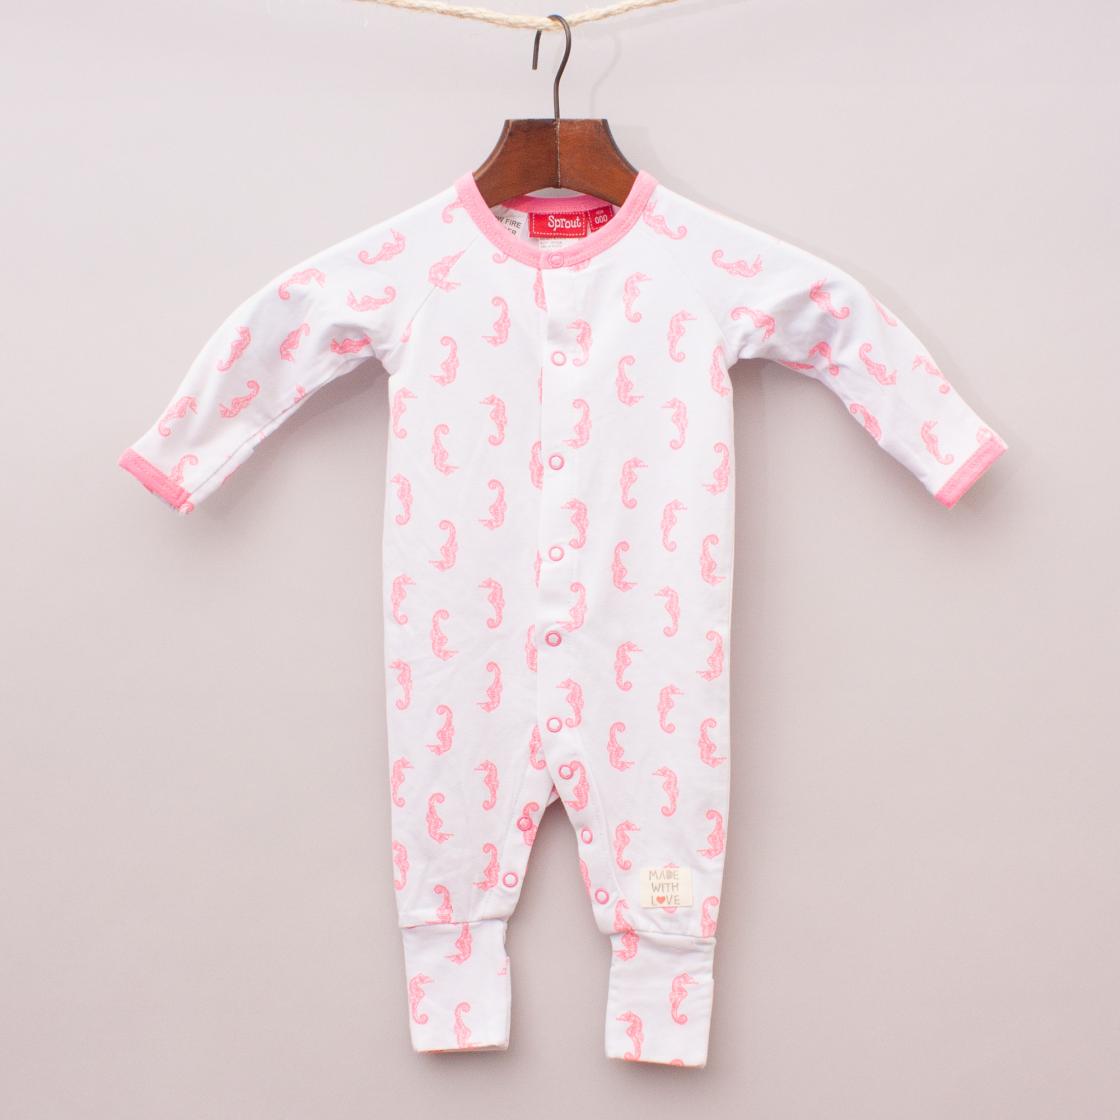 Sprout Seahorse Romper "Brand New"